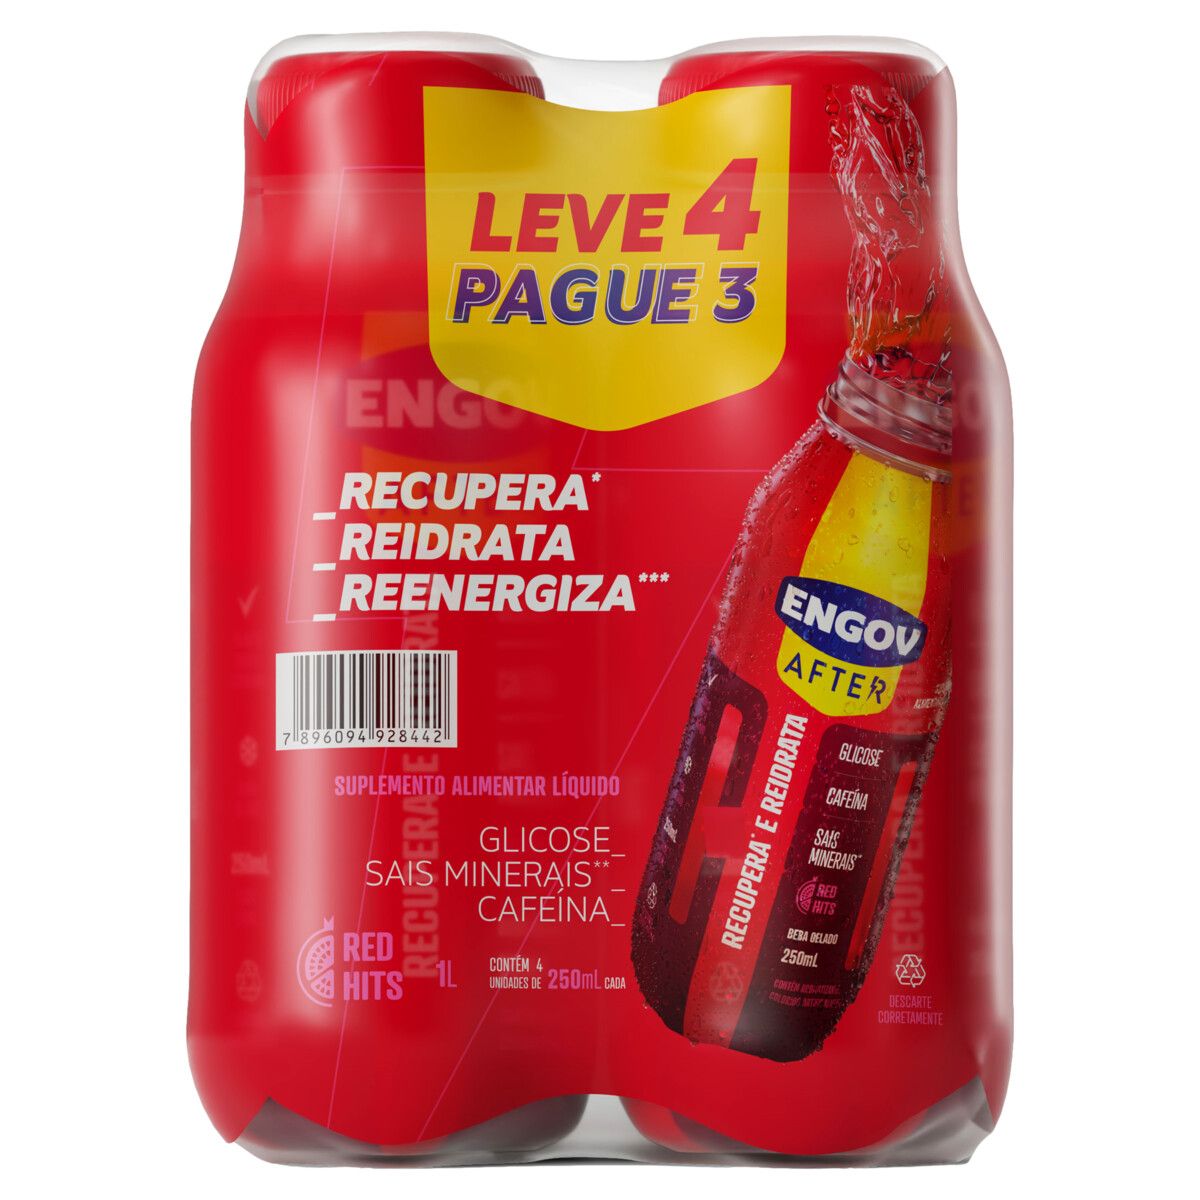 Engov After Red Hits 250ml Cada Leve 4 Pague 3 Unidades image number 0